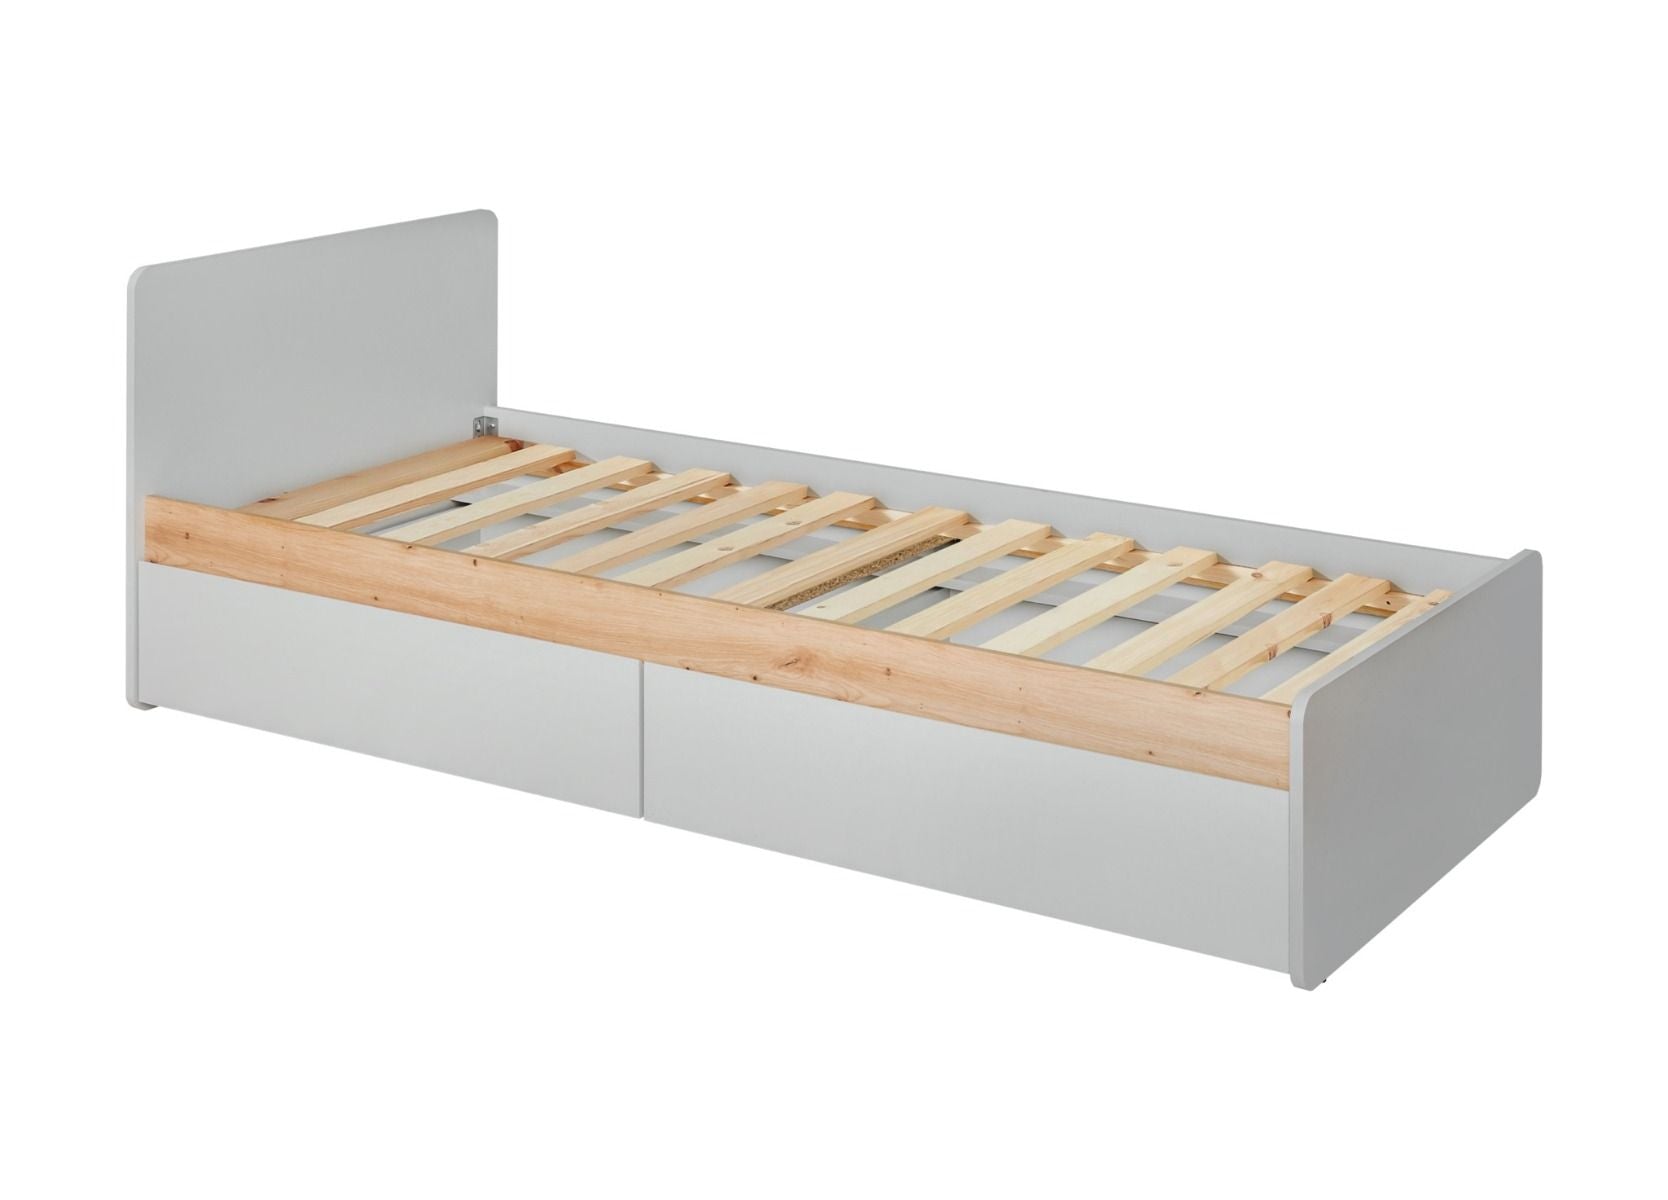 View Vivero Bed with Drawer information